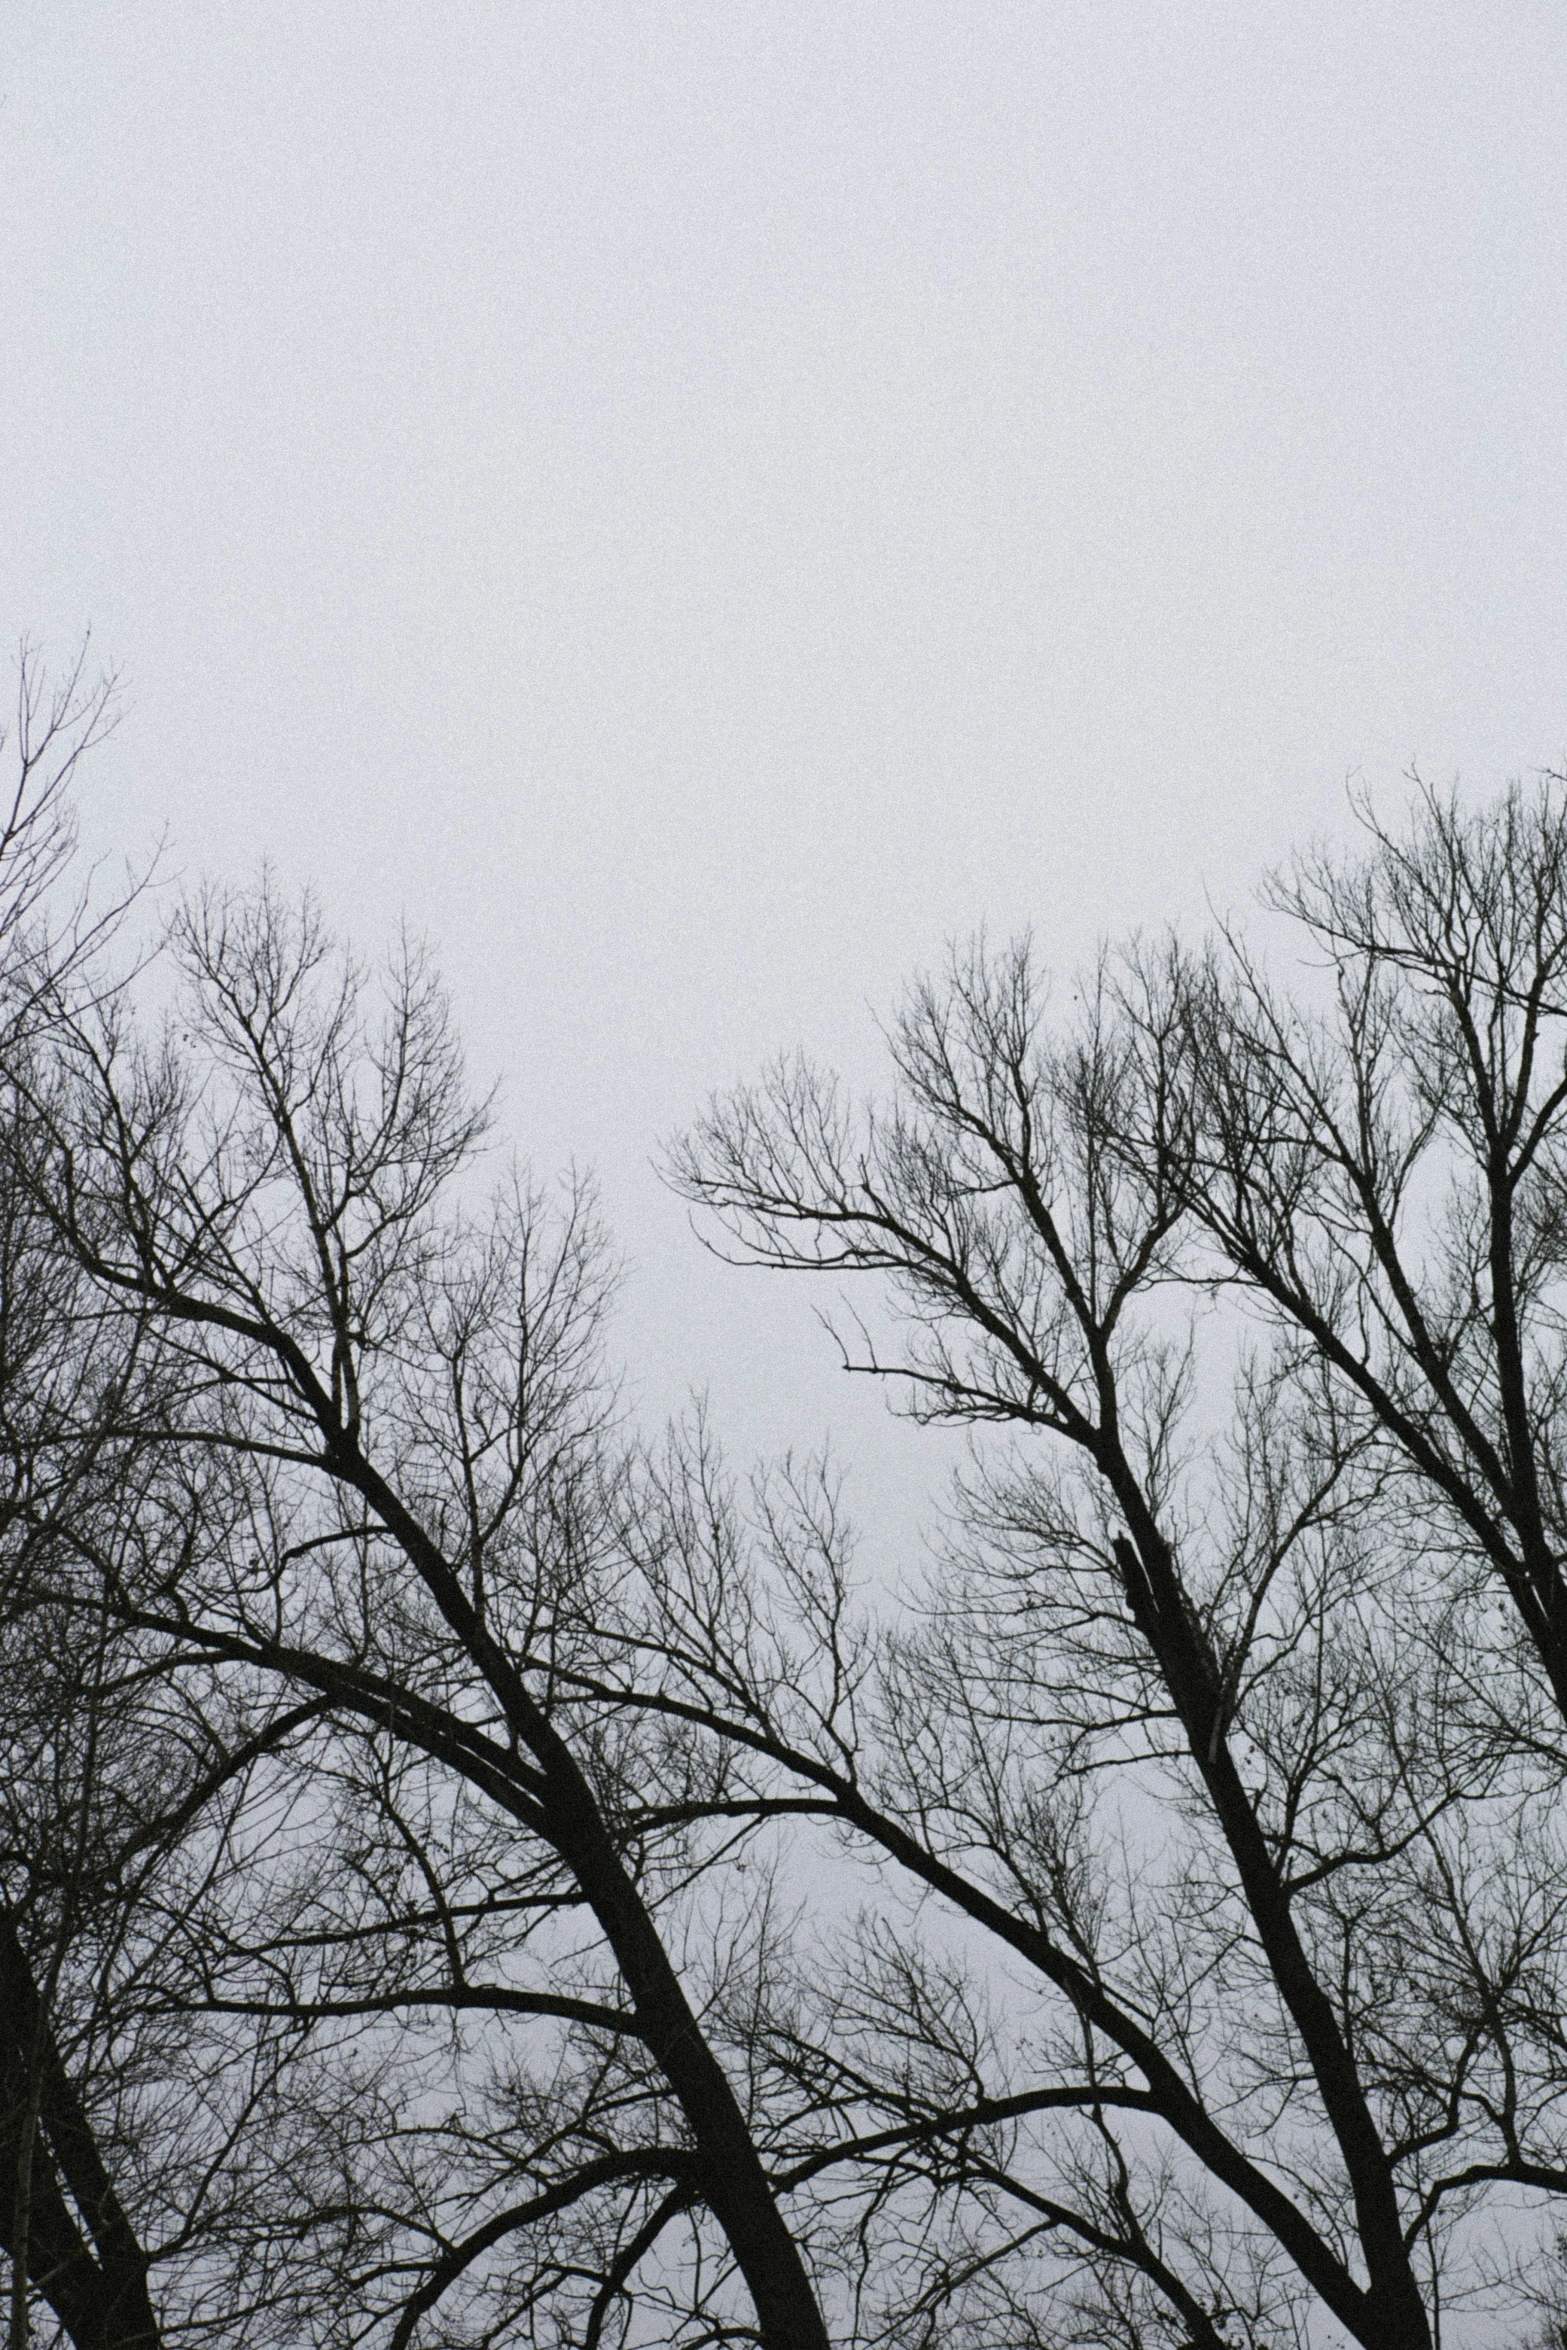 black and white image of the trees against a gray sky